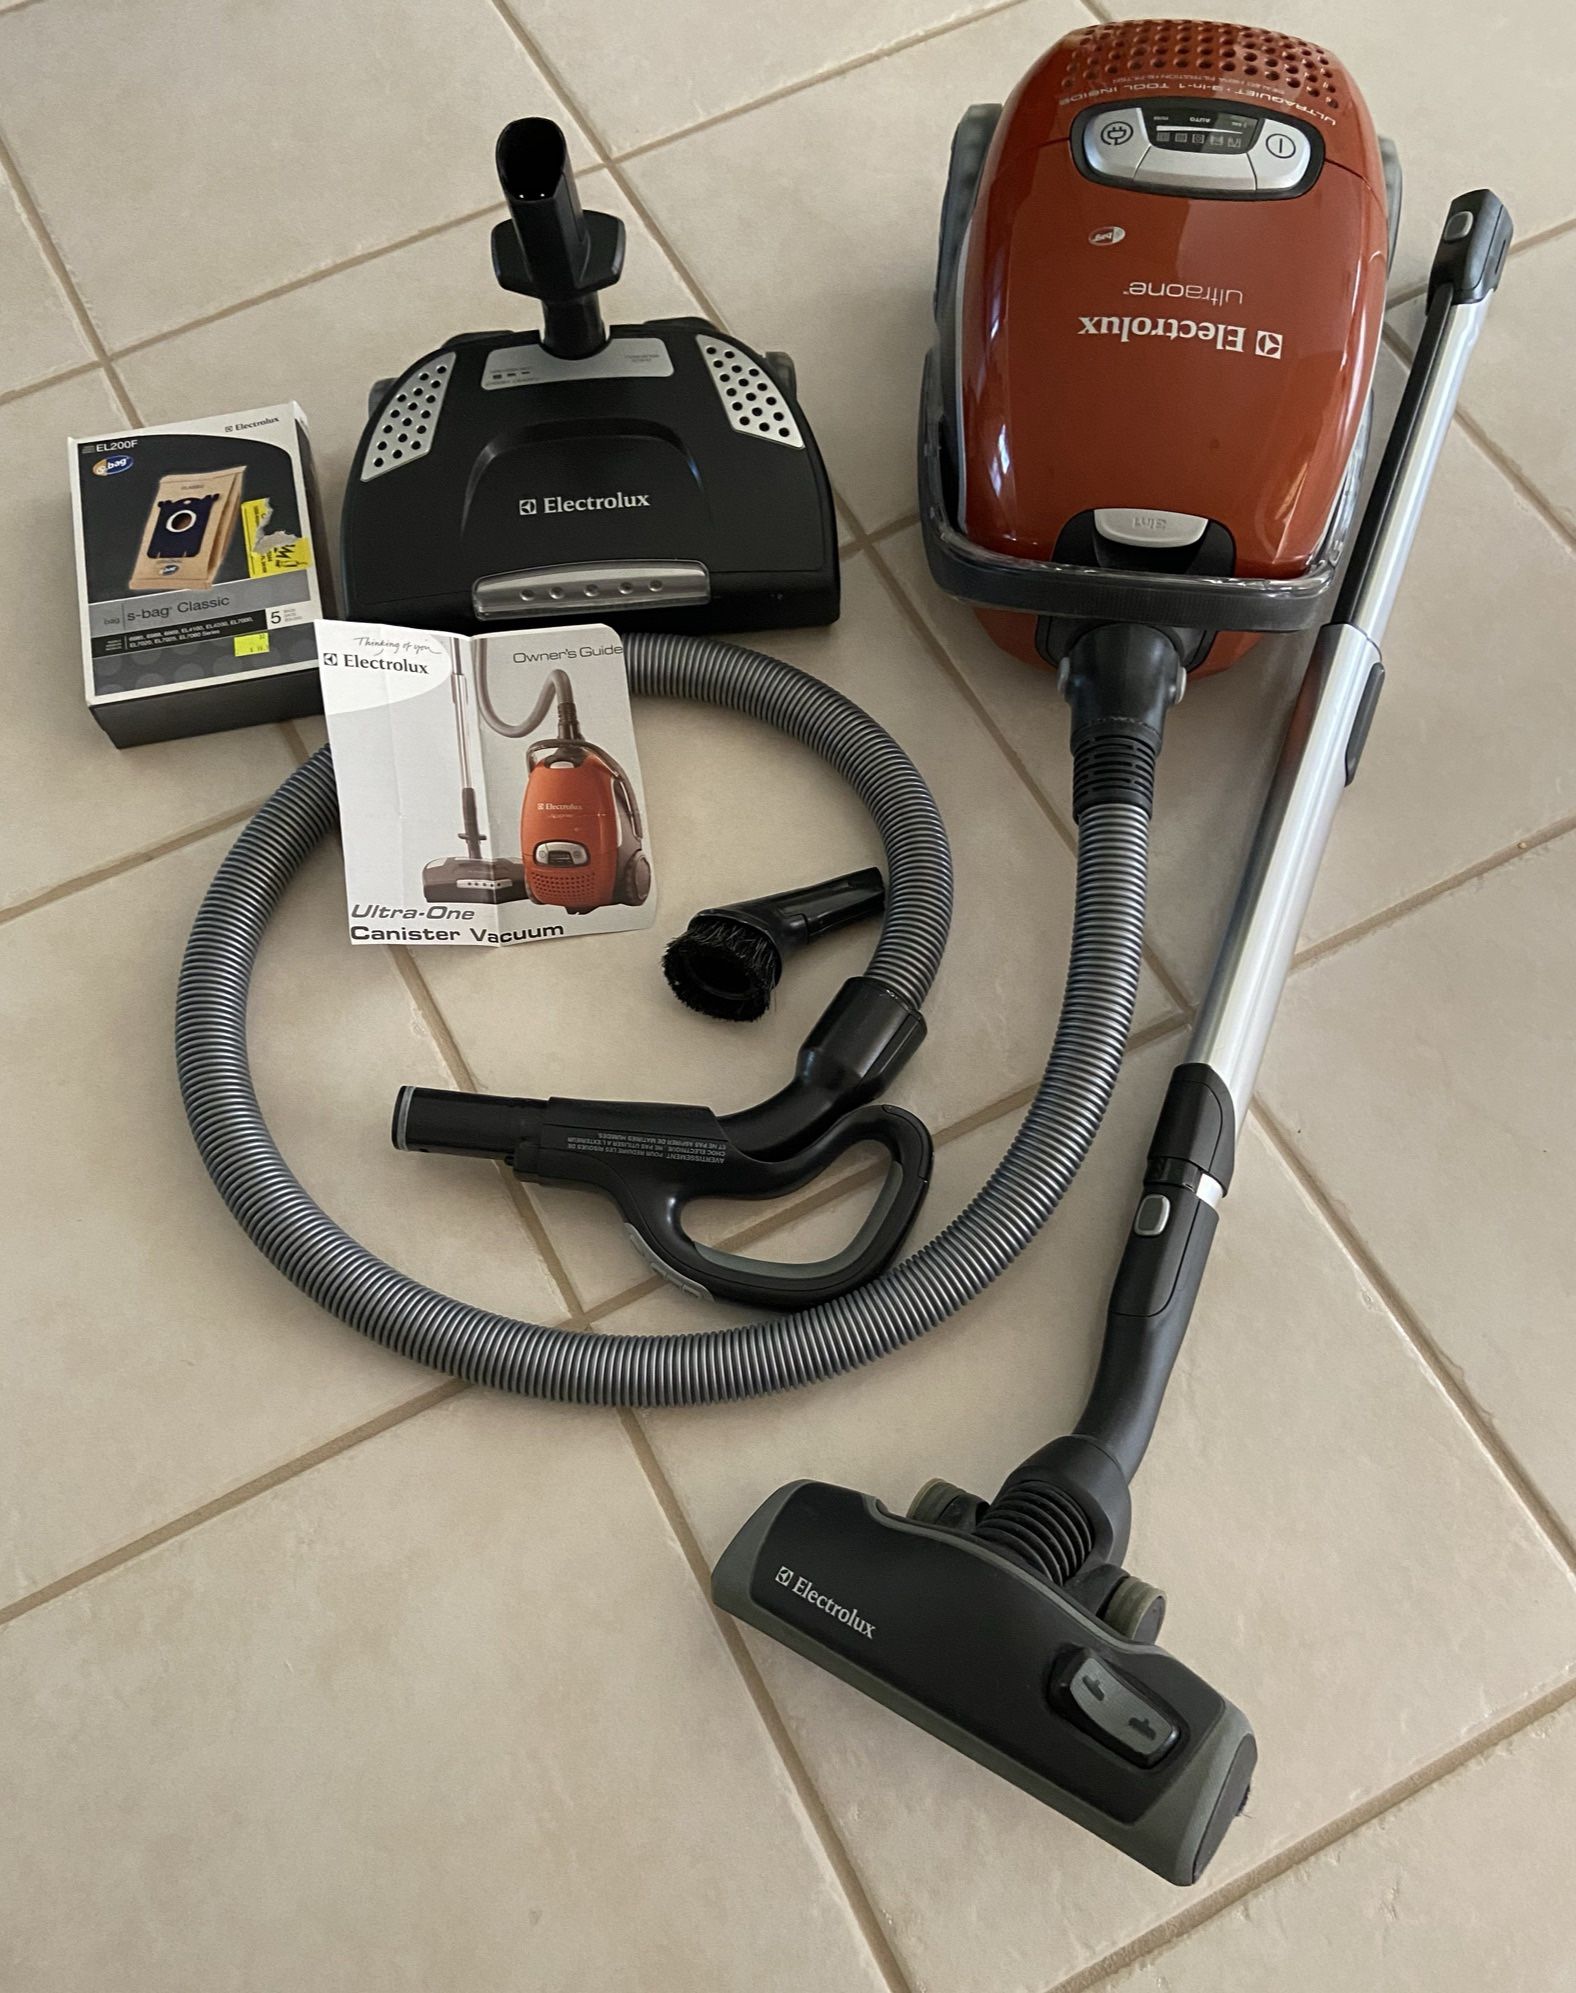 Electrolux Vacuum Ultra-One Canister Vacuum